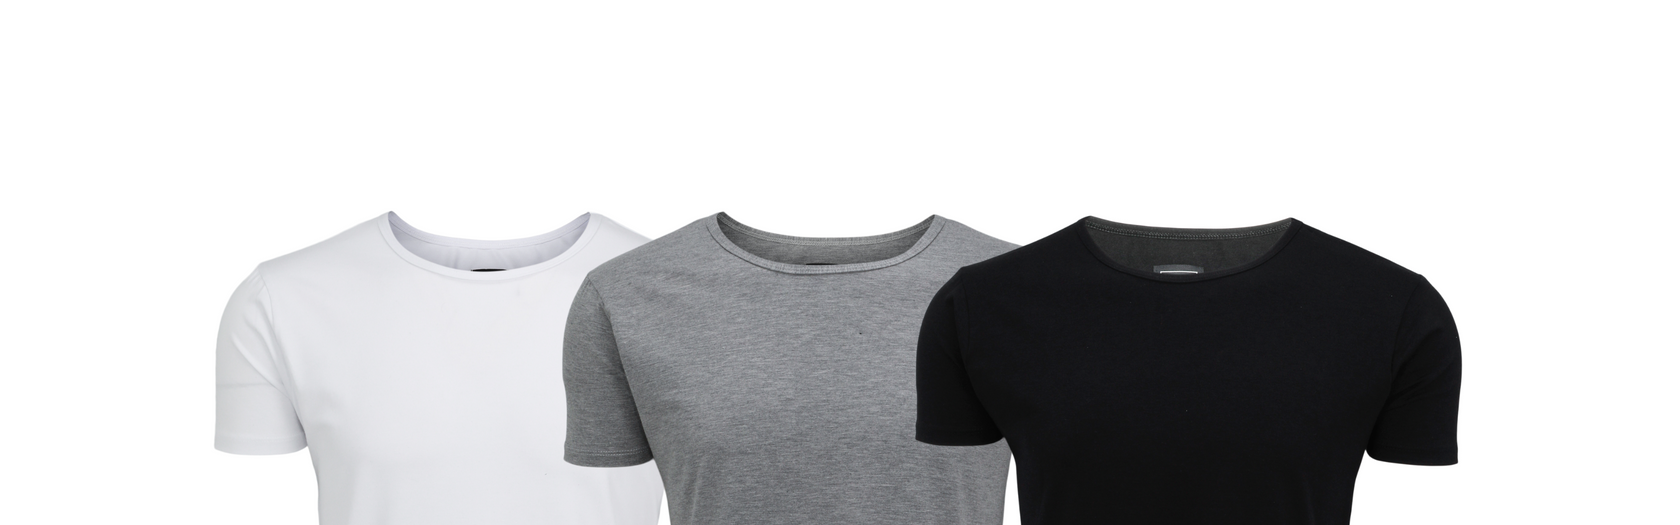 3d photos of the white, grey, and black short sleeve drop tees - essential curved hem t-shirts